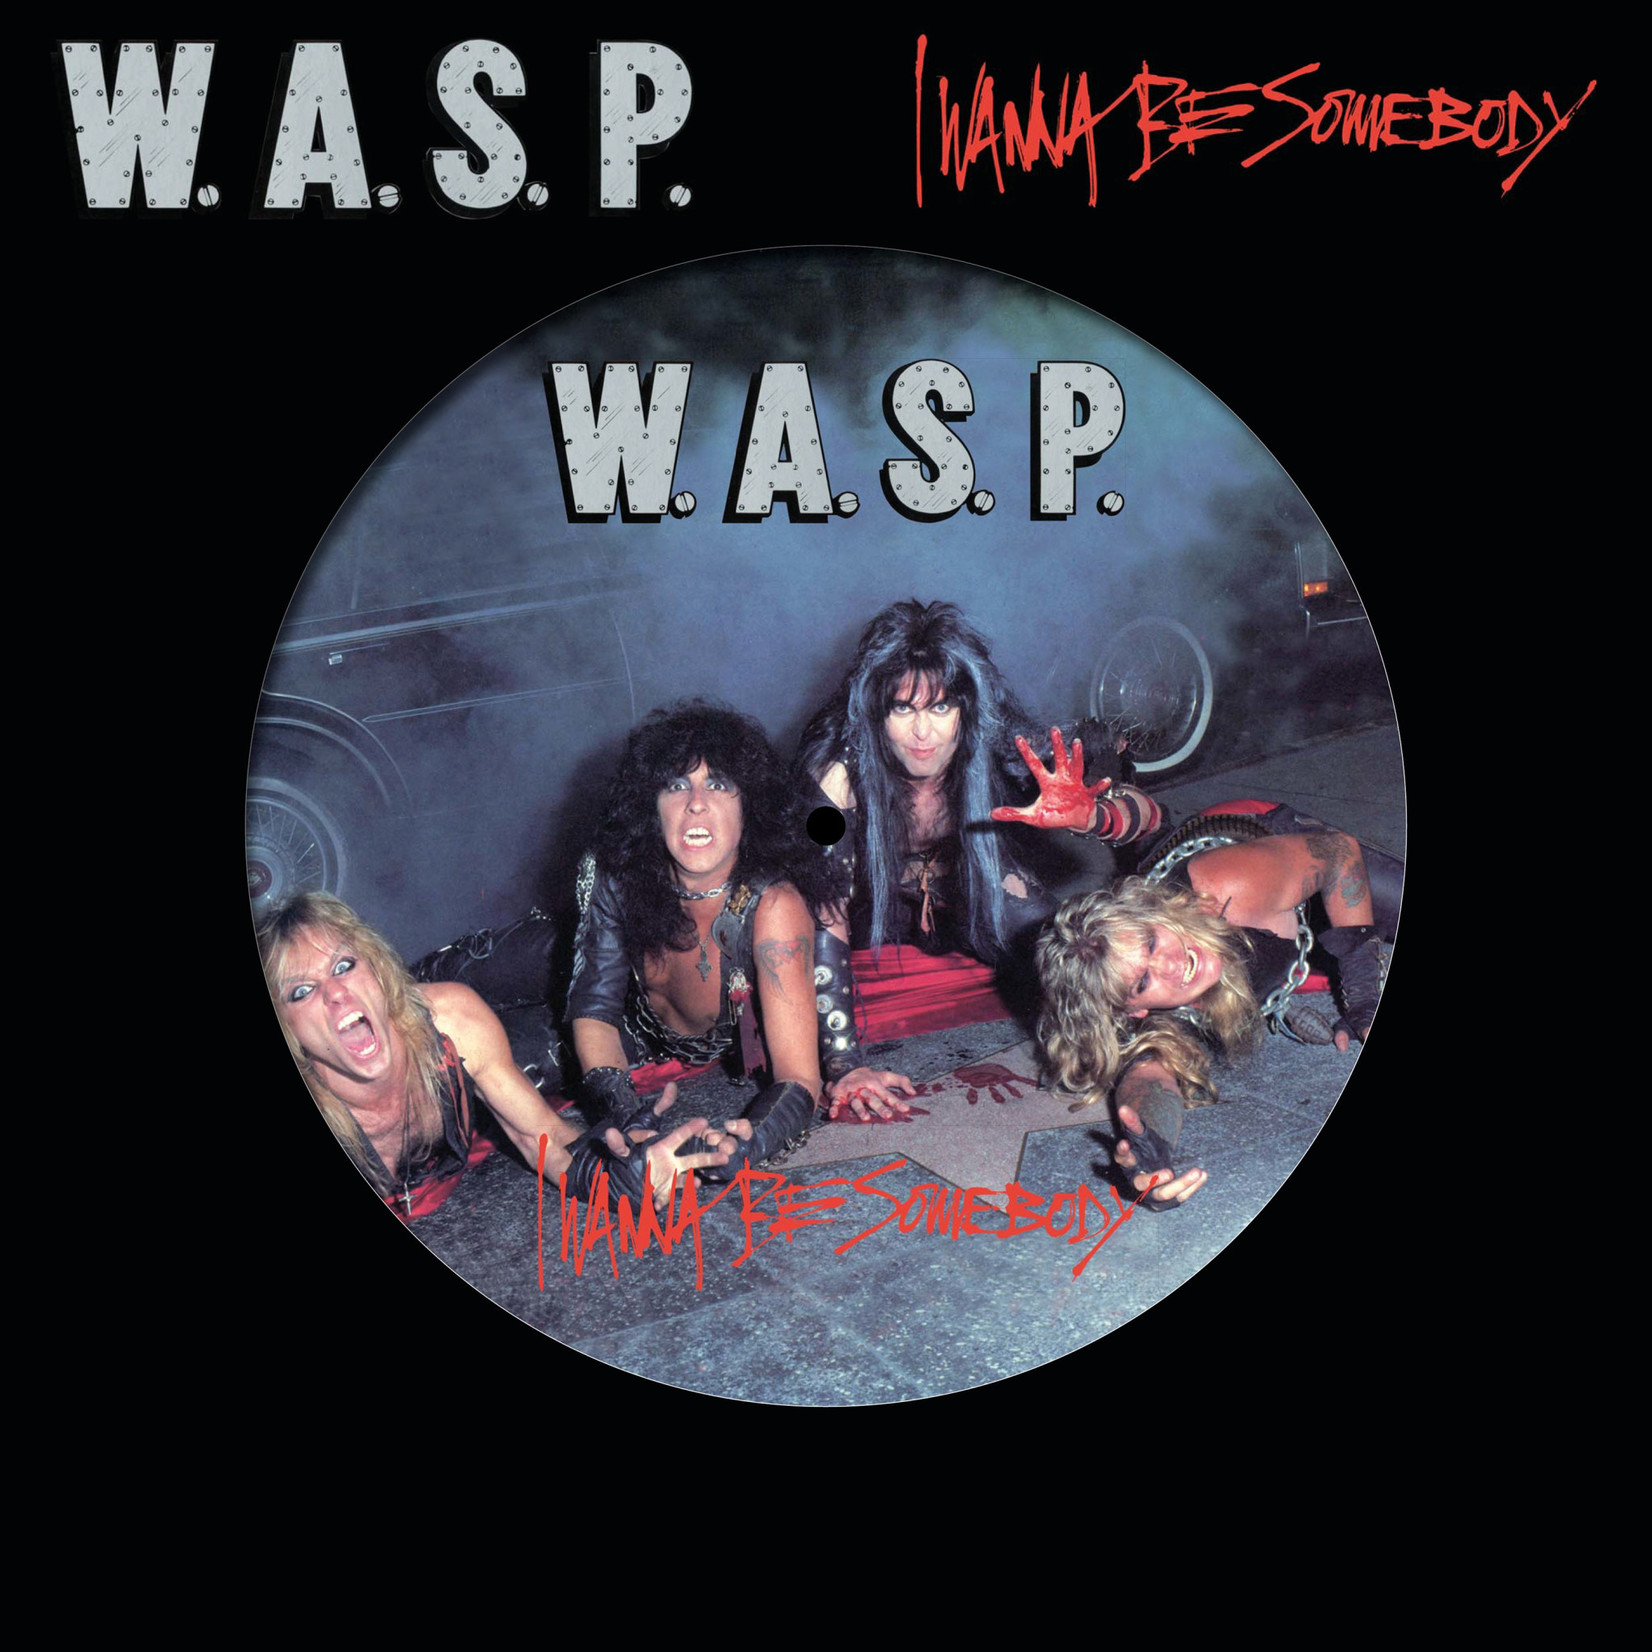 [New] W.A.S.P. - I Wanna Be Somebody (12"EP, picture disc / maxi single)